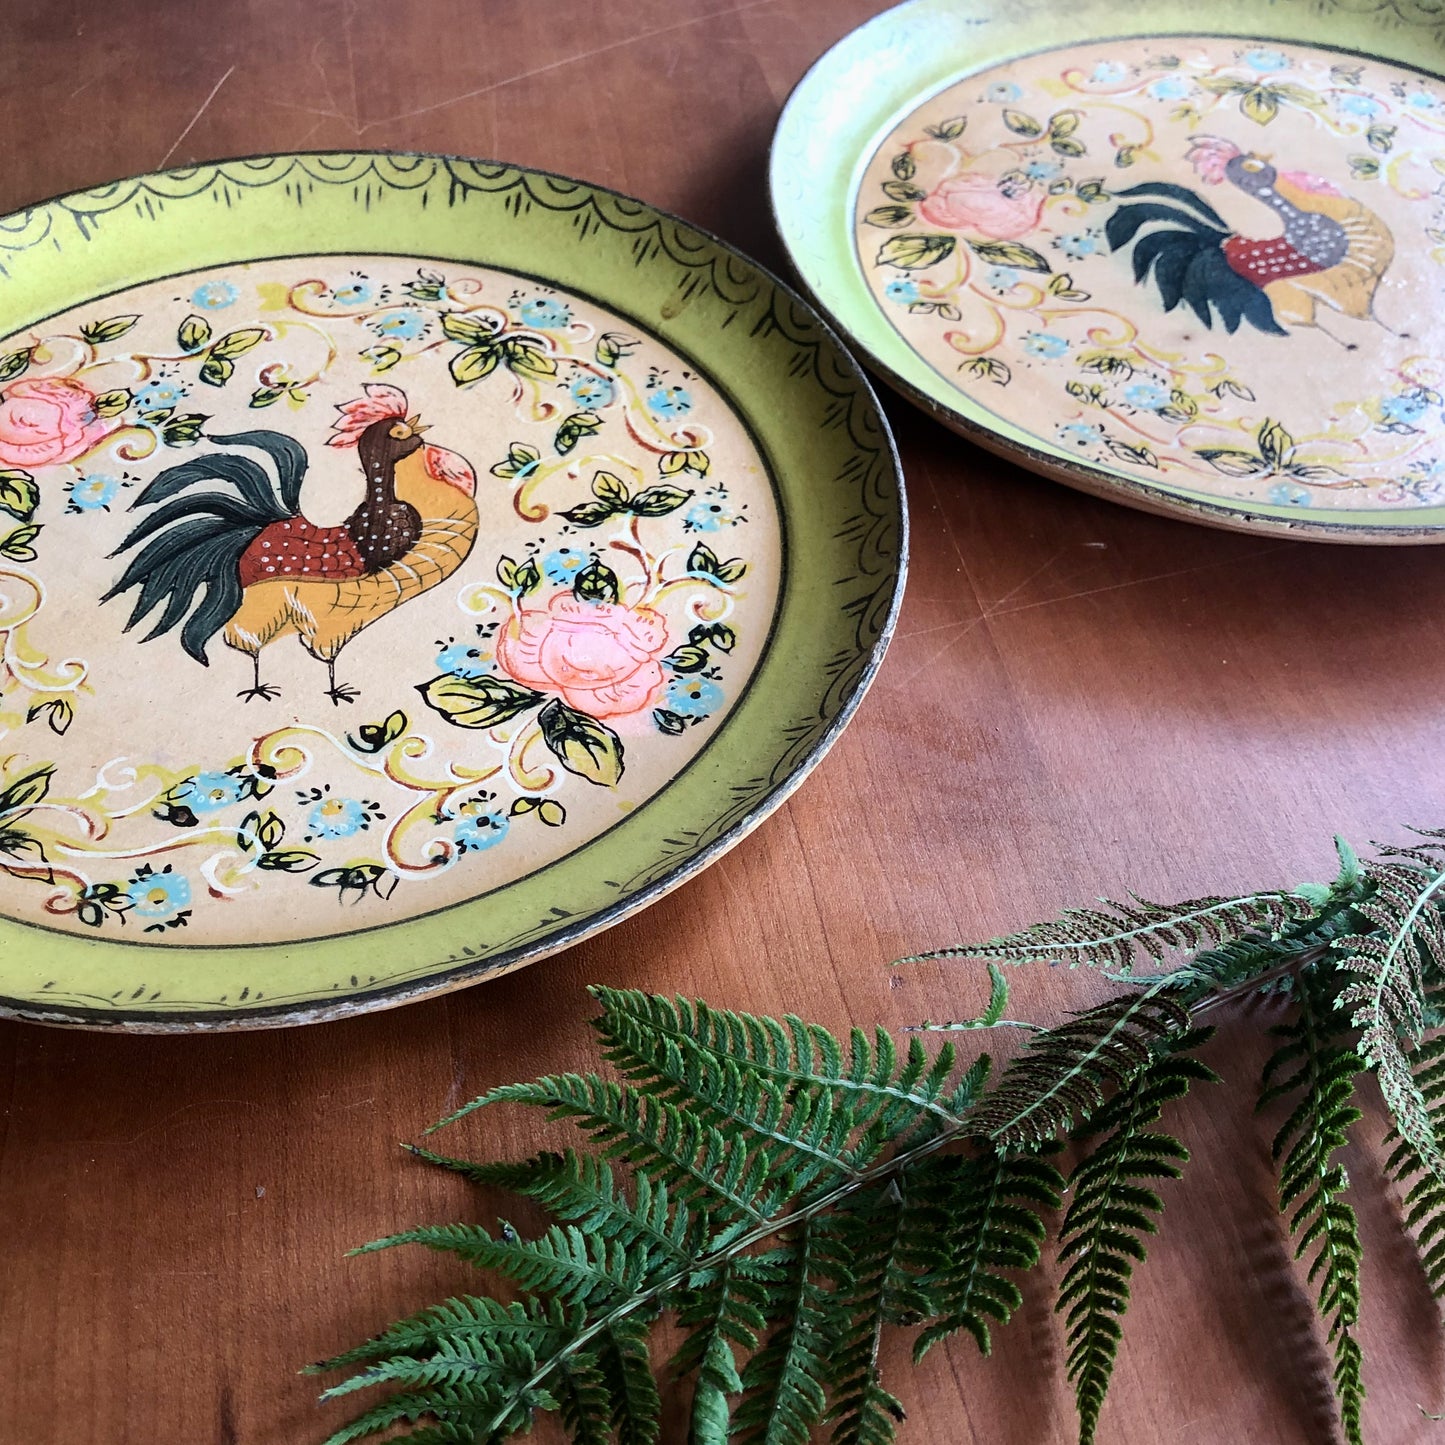 Vintage Paper Mache Plates with Rooster Motif (c.1950s)